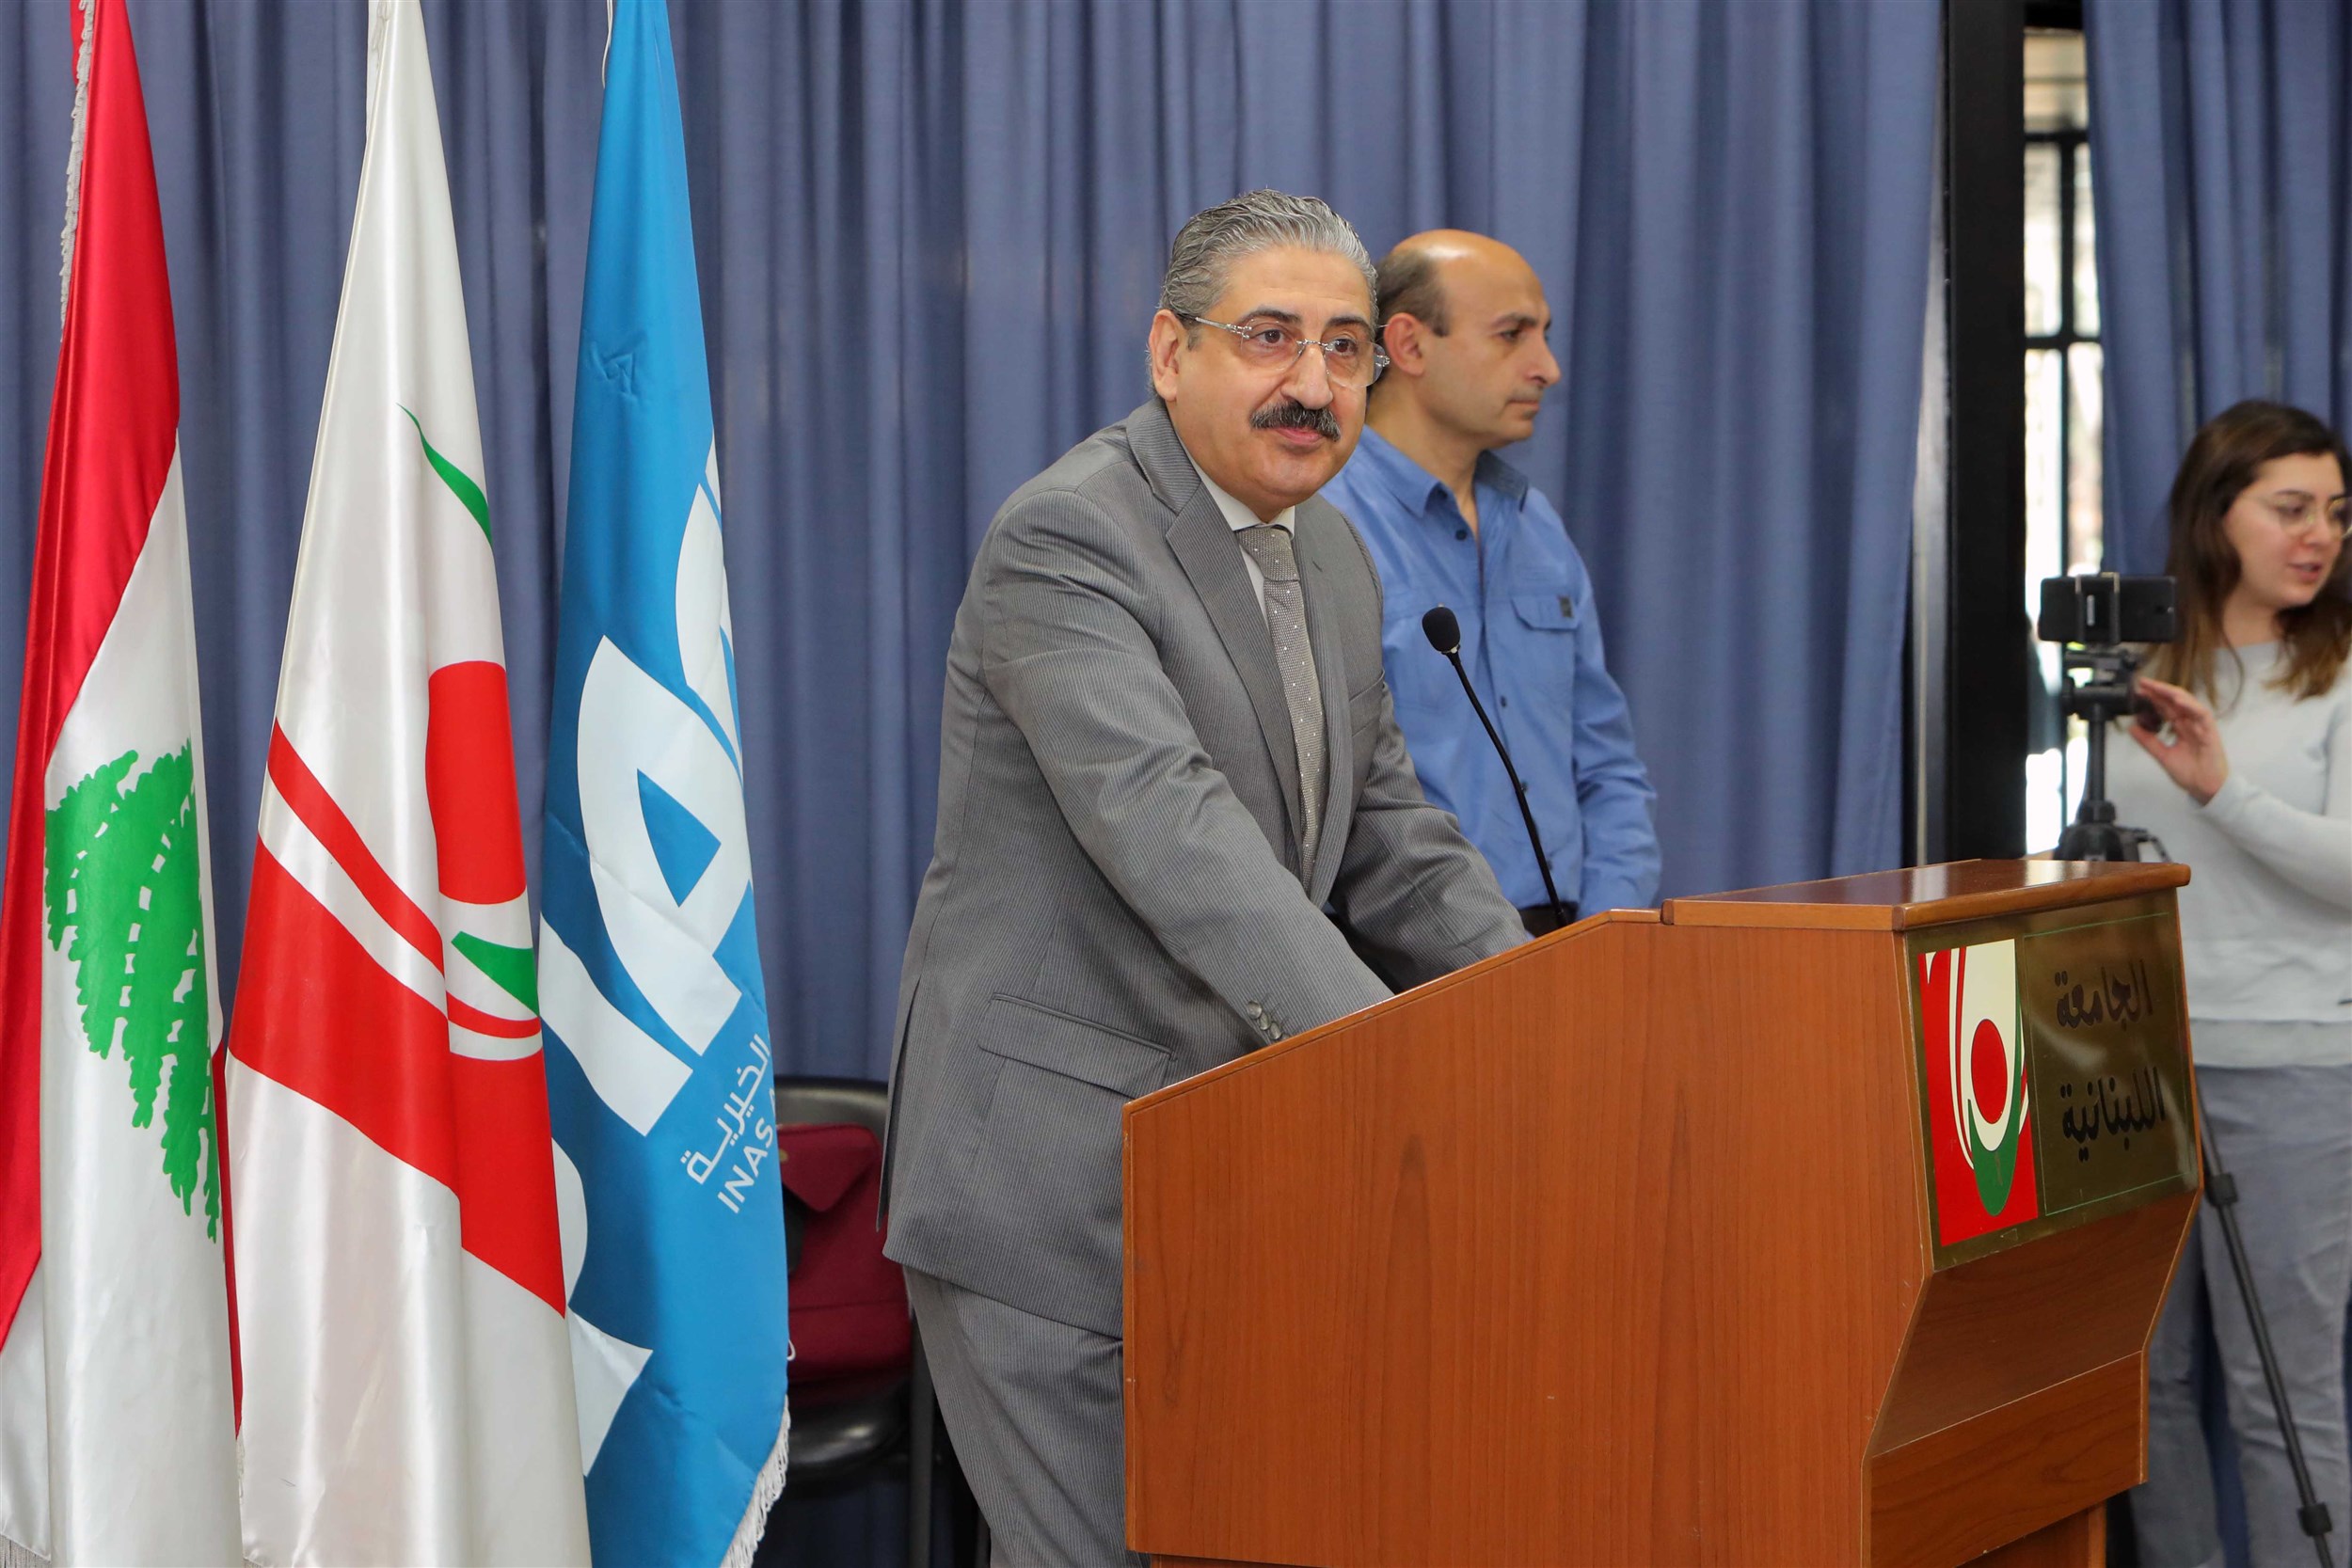 the president of the lebanese university professor fouad ayoub stating: “the initiatives taken by the brilliant science students, is undoubtedly one of the highest humanitarian works that surpass selfish reasons and personal gain. science is the way to expand our future horizons and reveal our potentials to be open for more”.